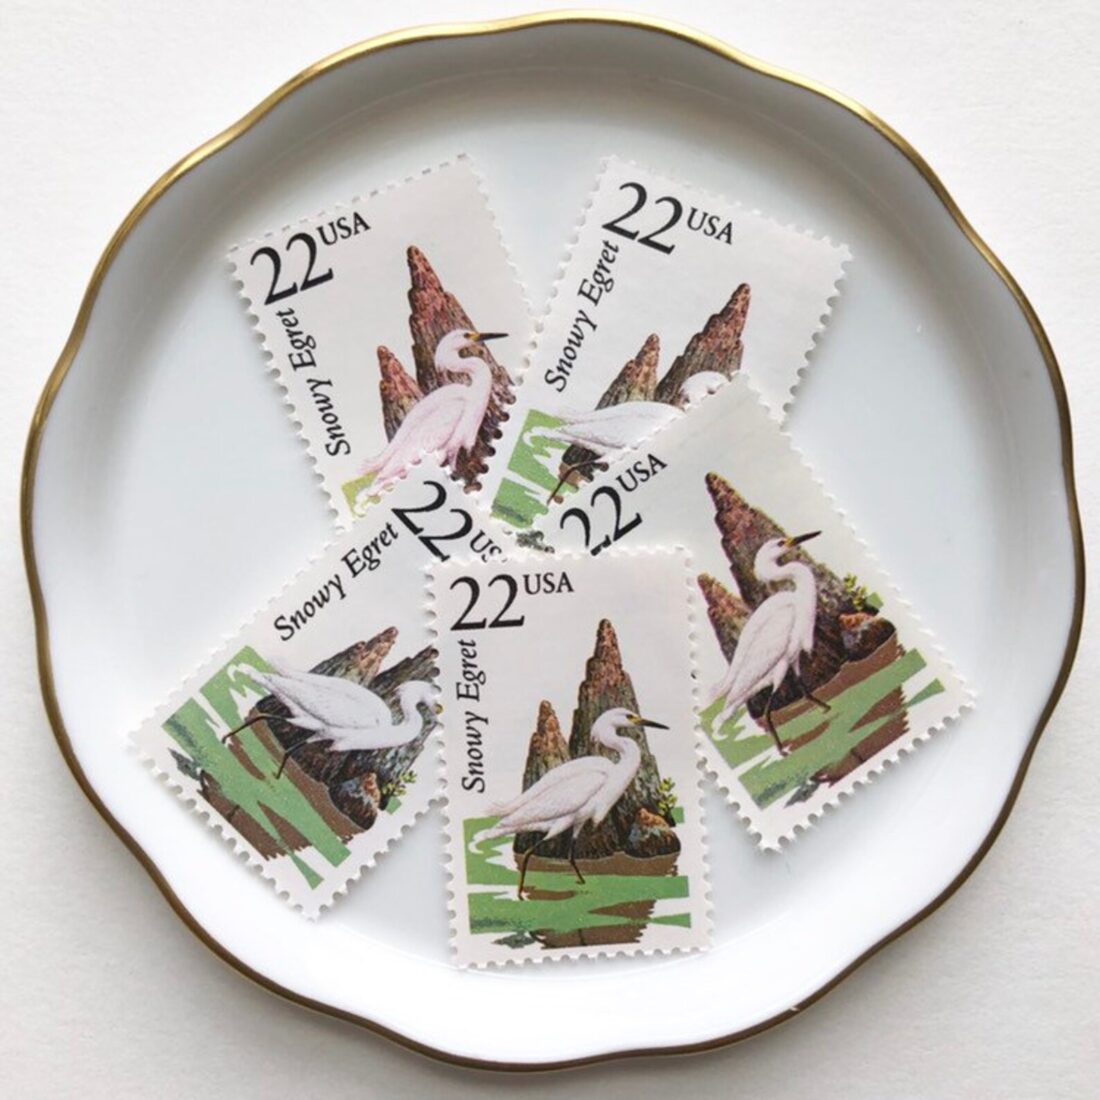 Five postage stamps with illustrations of a white egret. The stamps are on a white plate with a gold rim